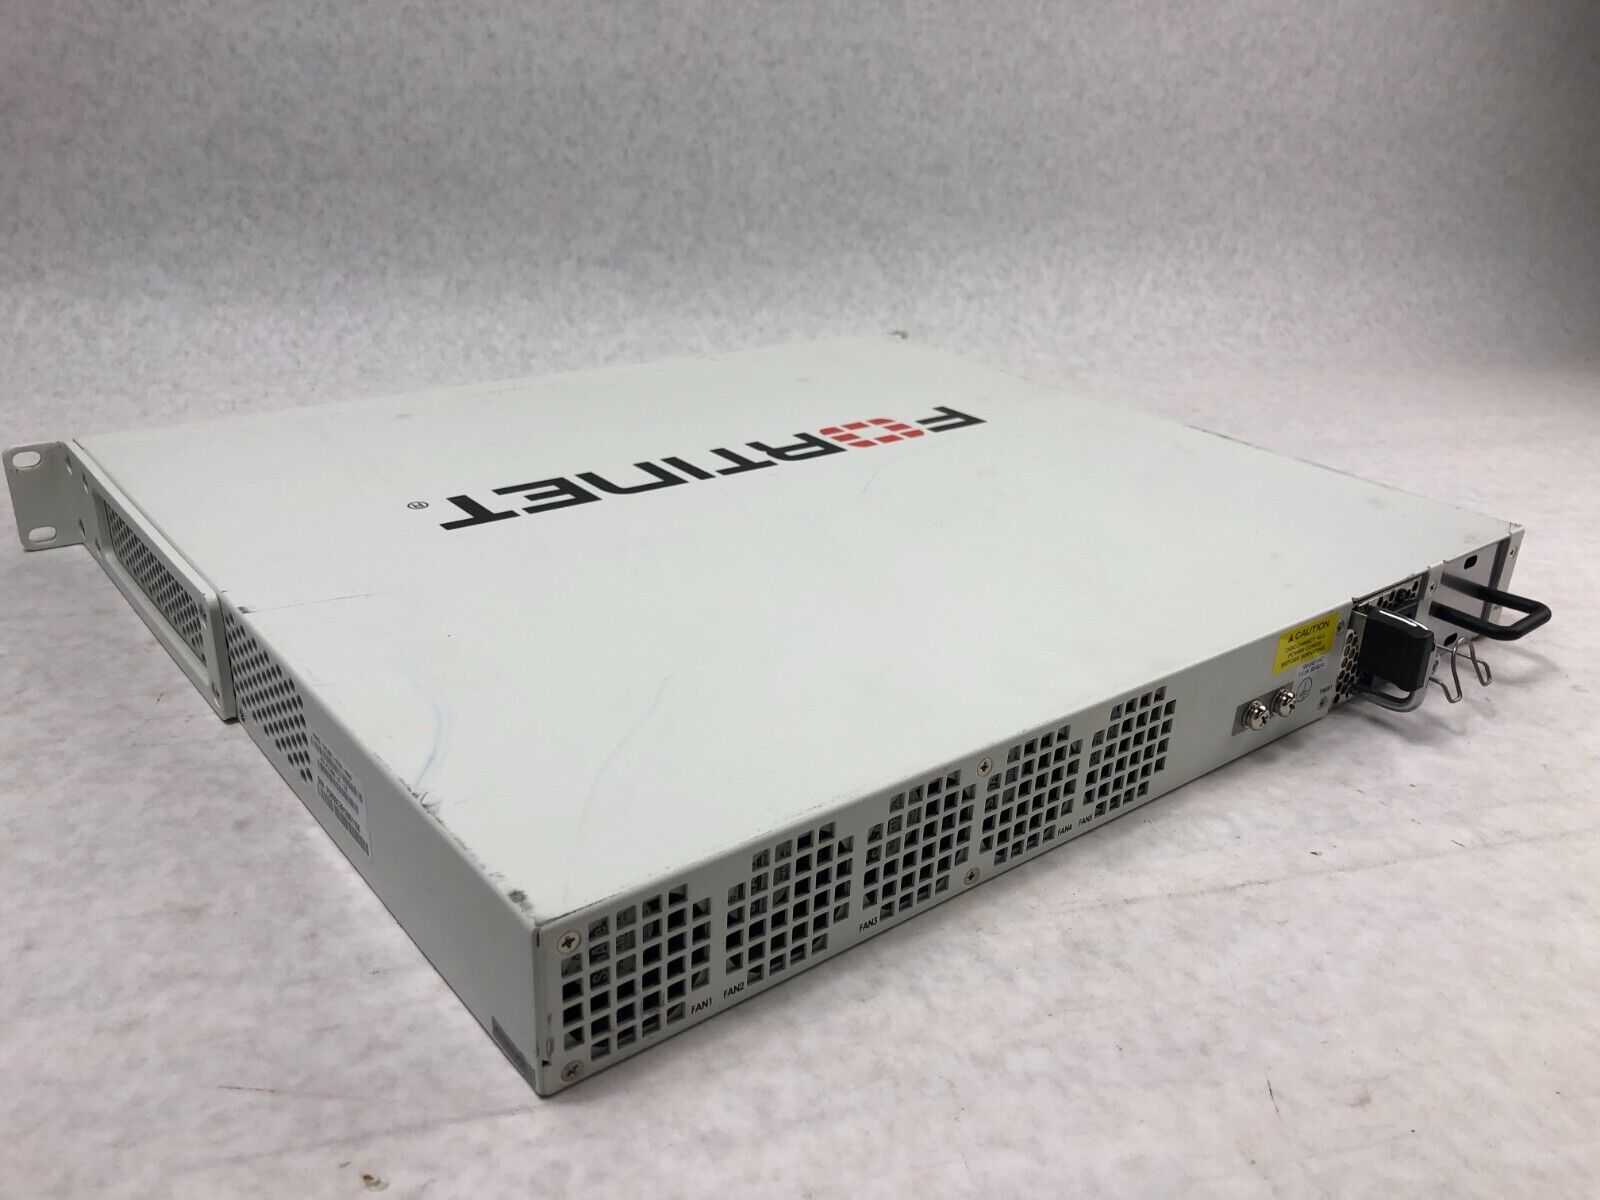 Fortinet Rack Mountable FortiGate 800C FireWall Security FG-800C